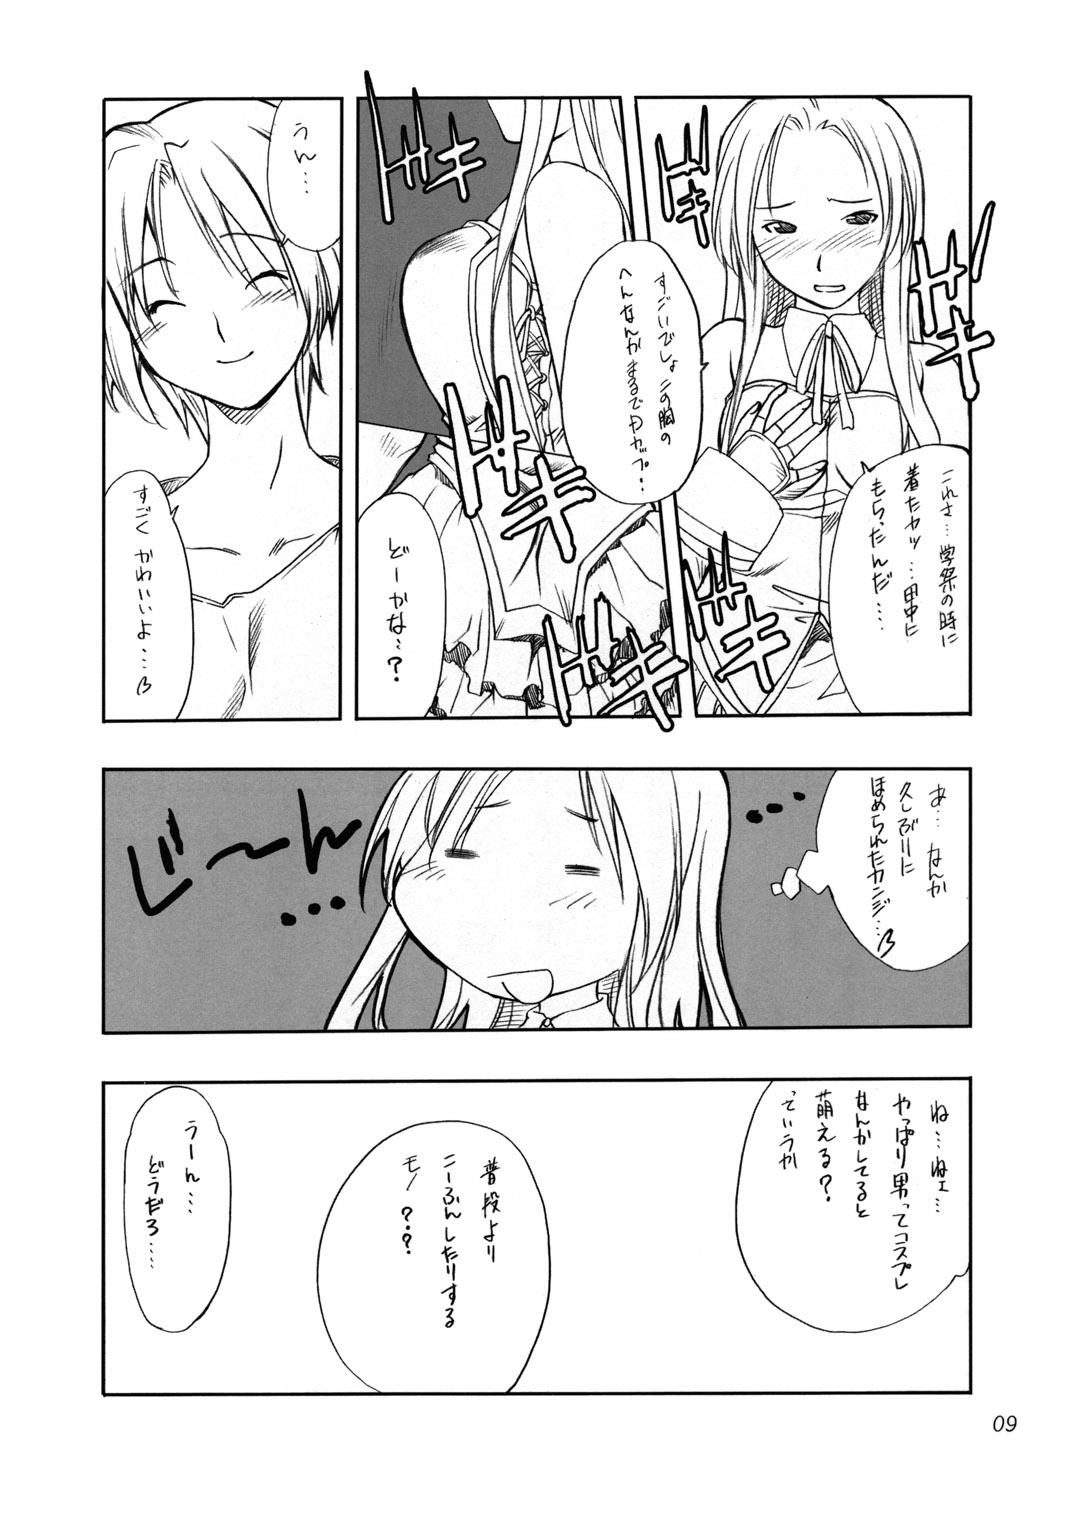 Blackmail Cosplay COMPLEX - Genshiken First - Page 8